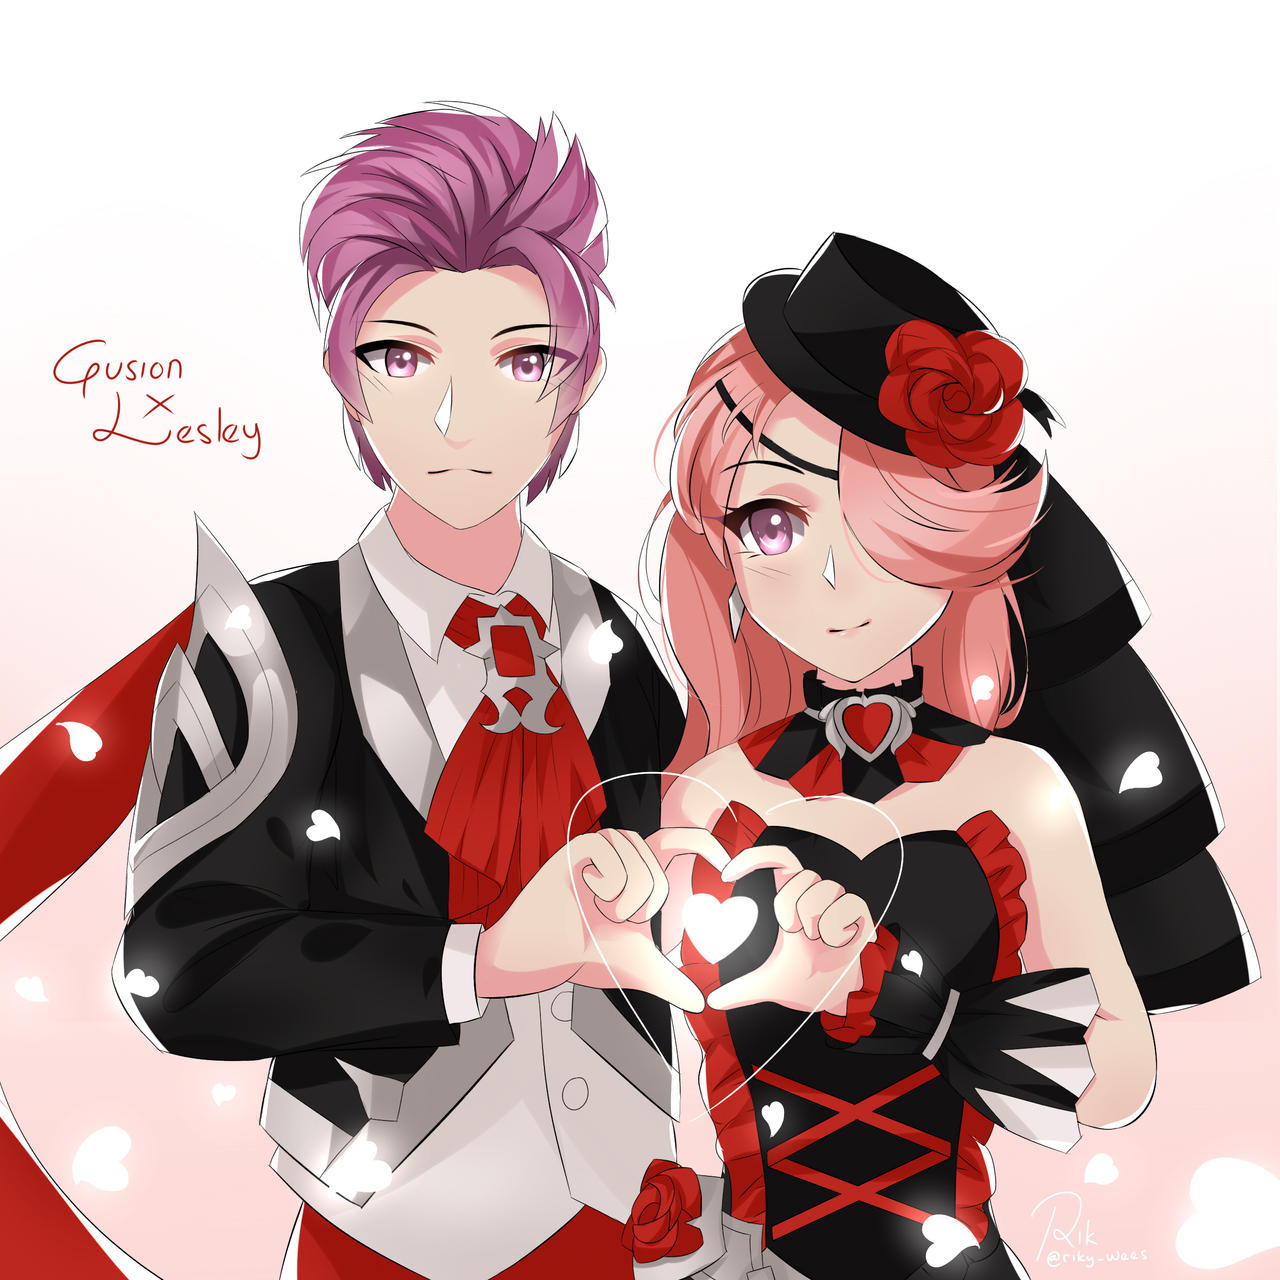 gusion x lesley by rikywees on DeviantArt